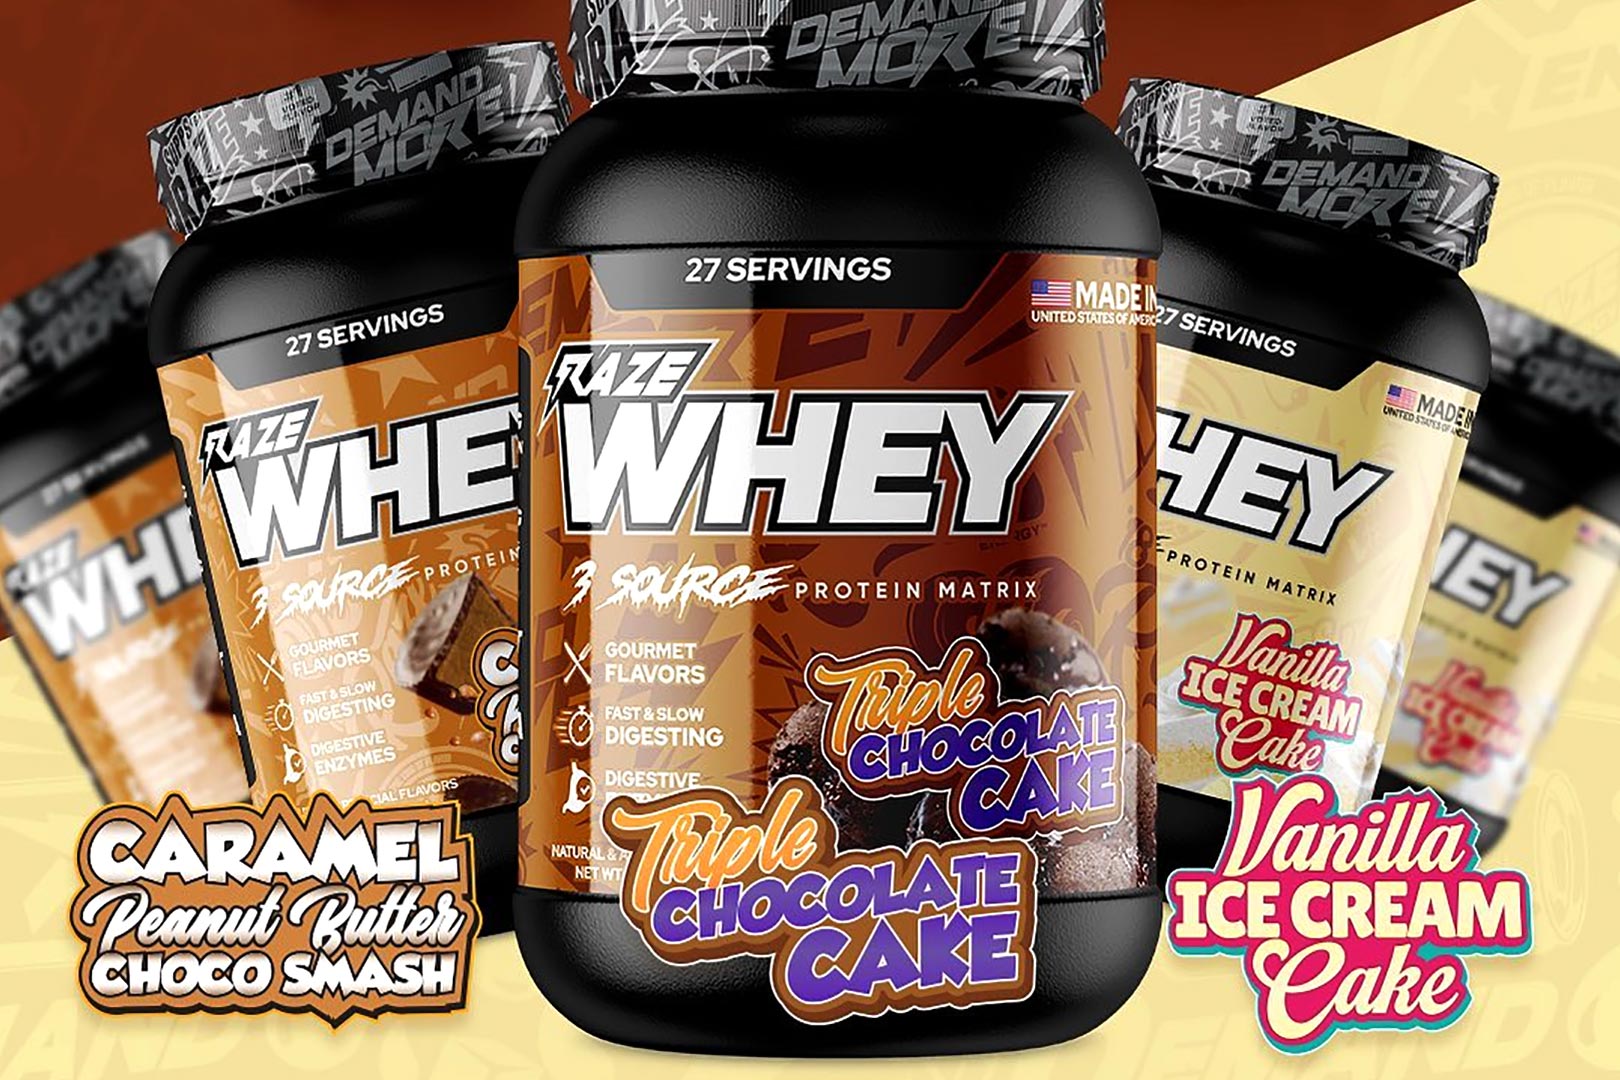 raze-whey-combines-three-sources-of-whey-for-24g-of-protein